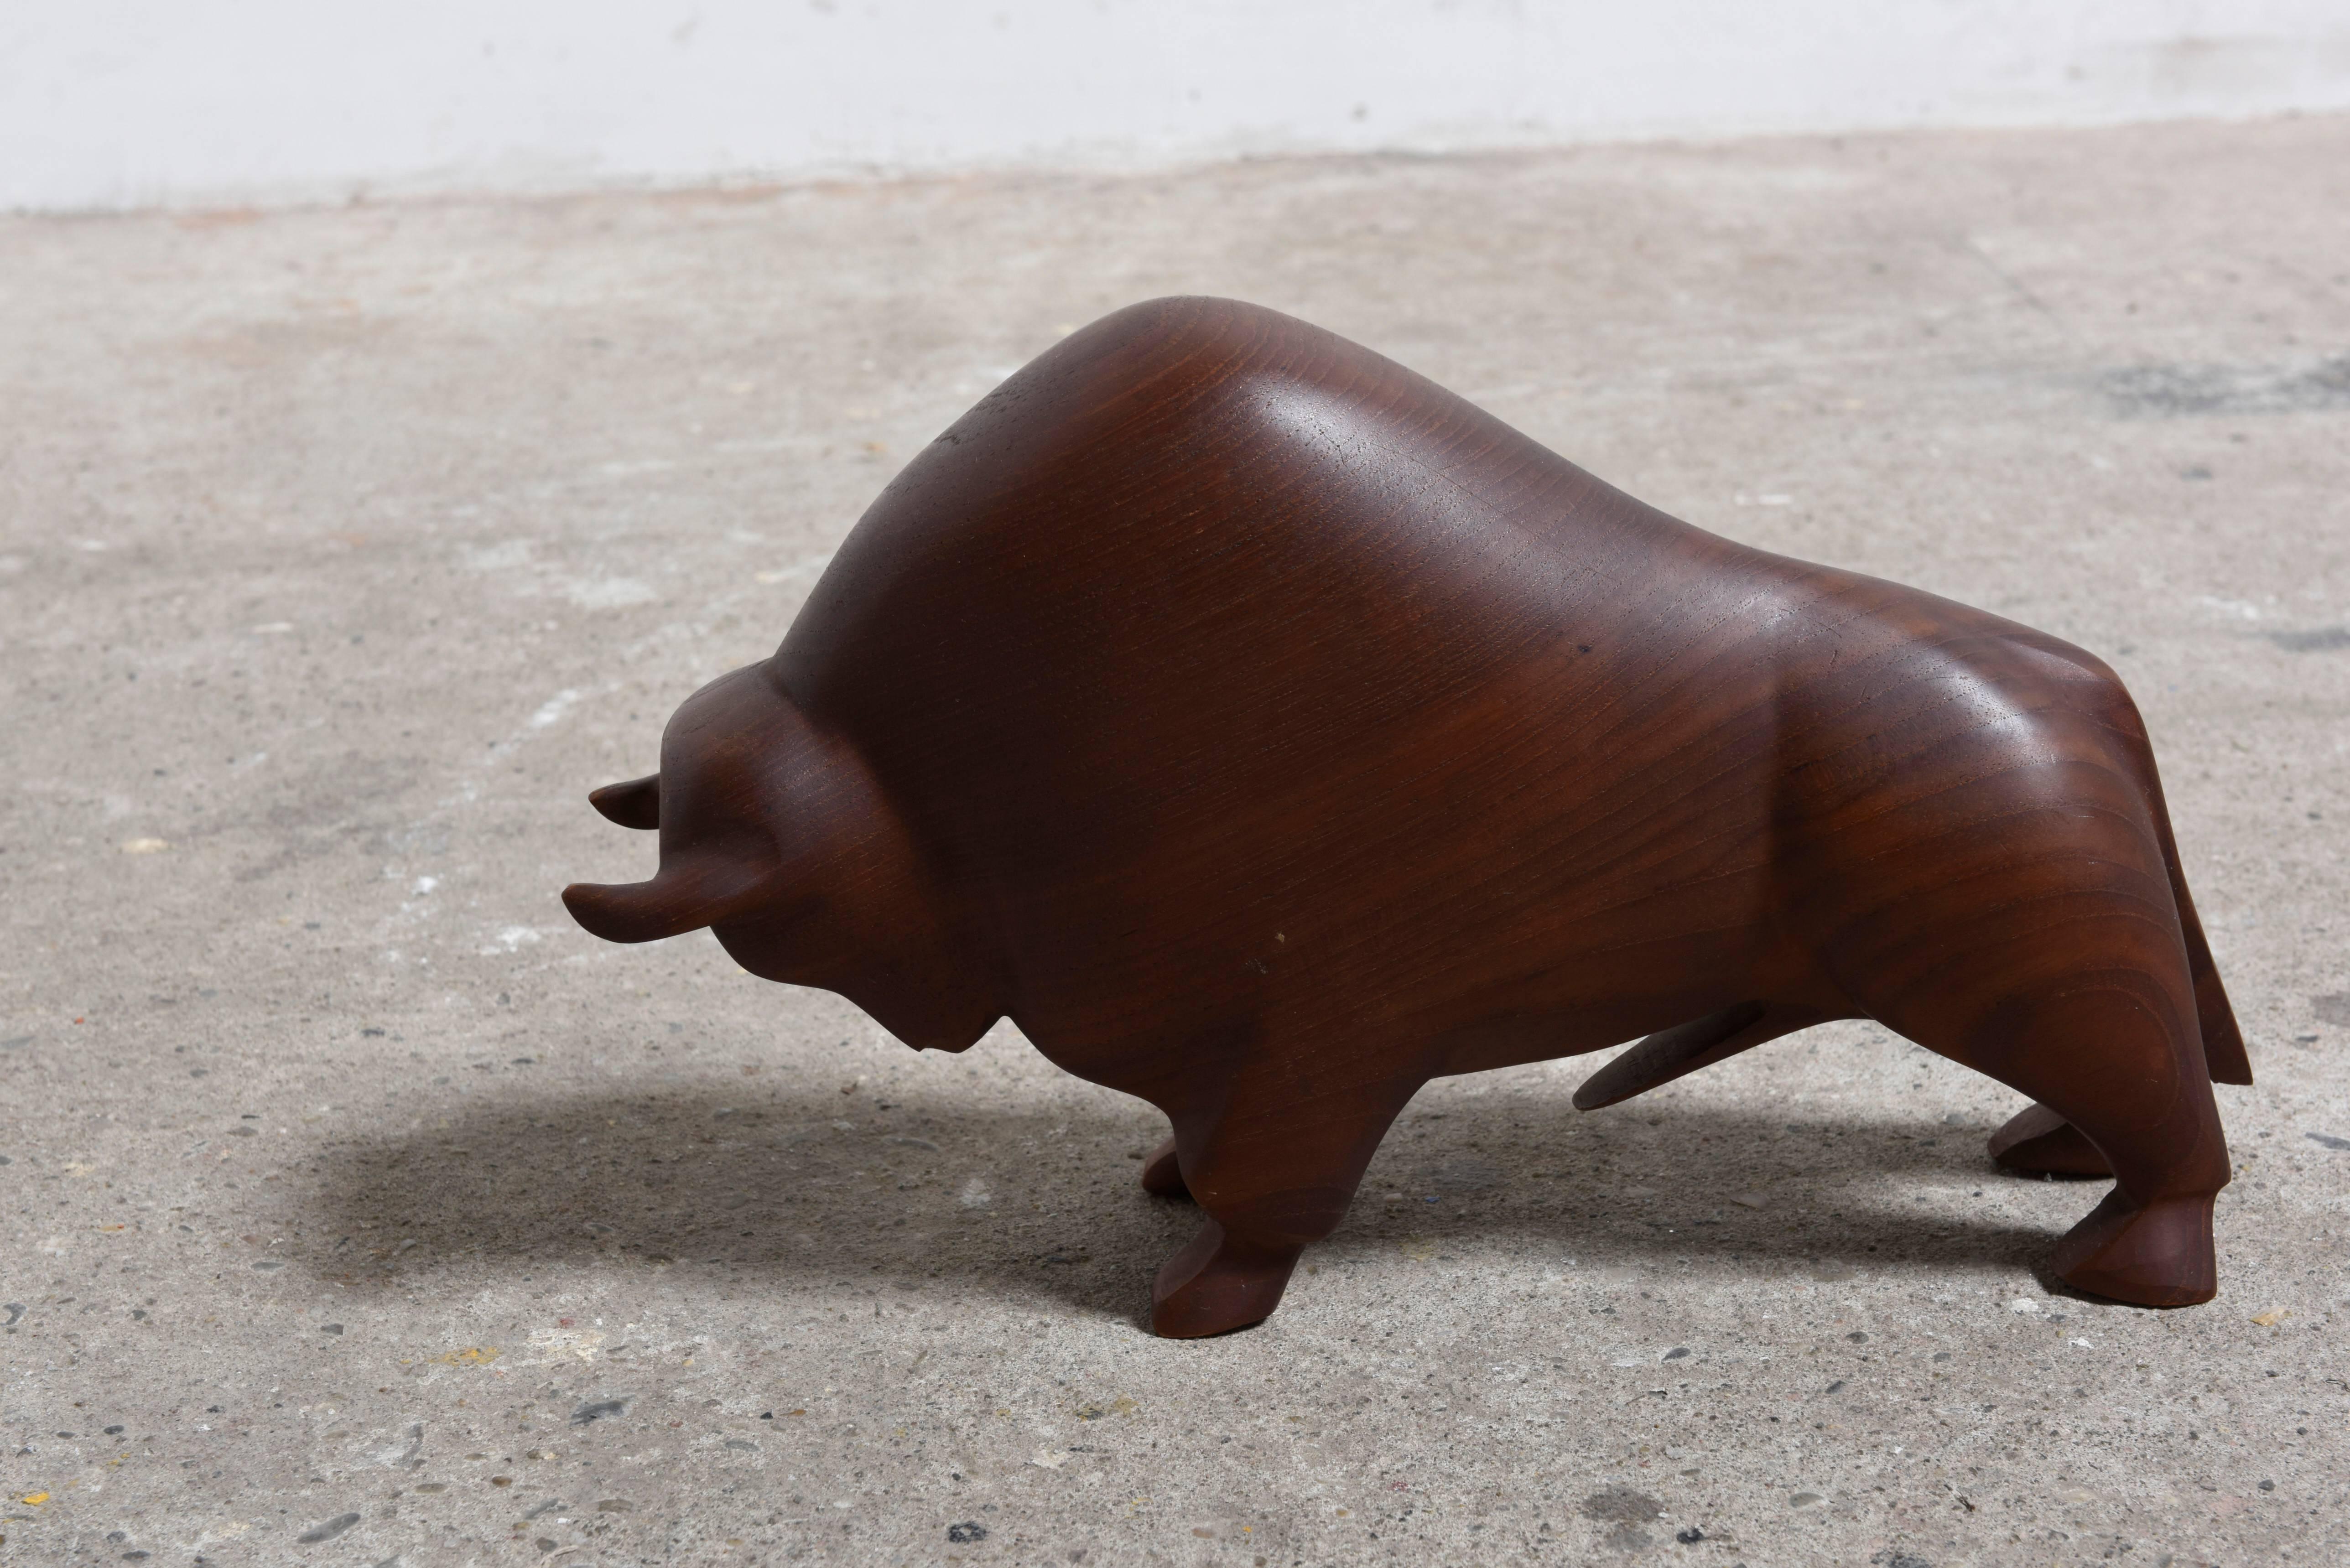 Mid-Century Modern teak bull sculpture, Denmark, 1960s.

Absolutely stunning piece of Danish Modern design. 
An abstract carved solid teak bull sculpture in great vintage condition. 
The shape of the bull works beautifully with the wood's grain.